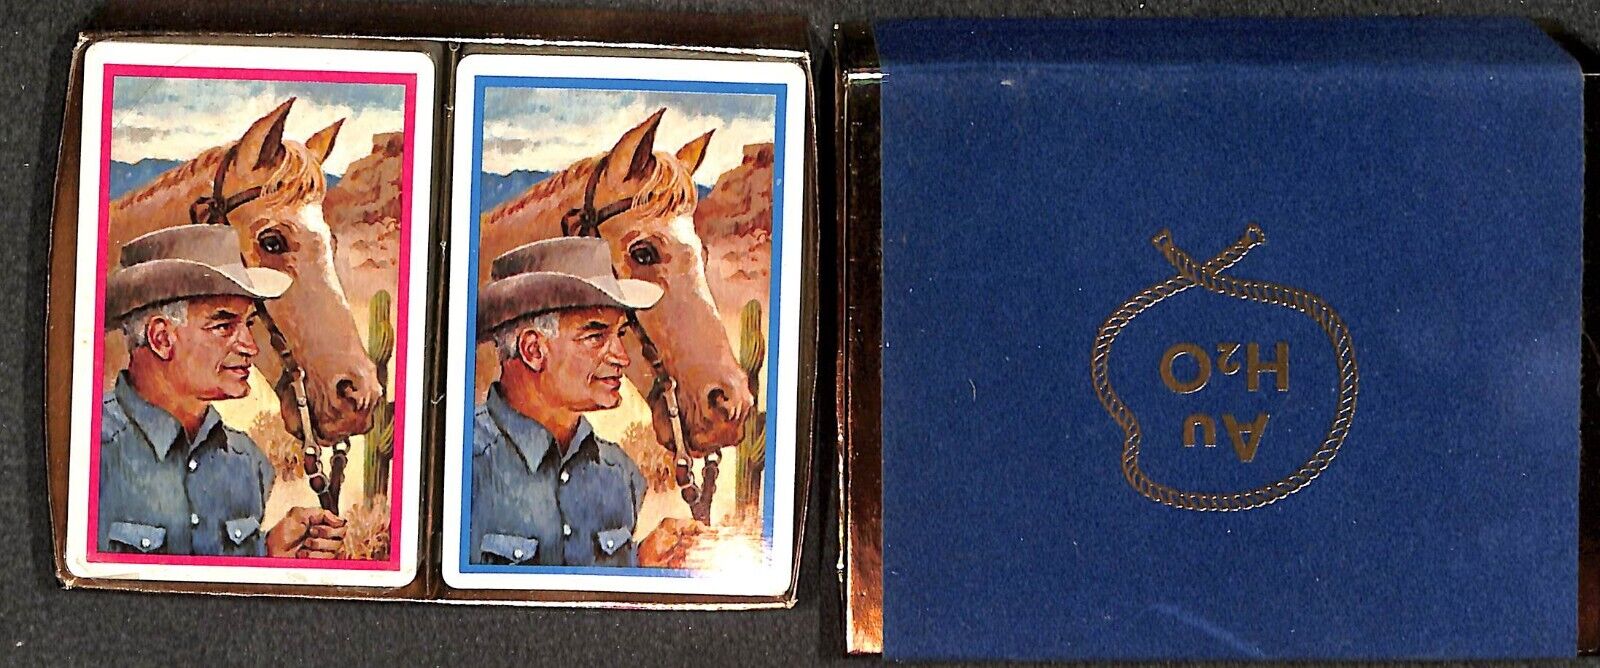 Mint Original Barry Goldwater 1964 Campaign Playing Card Set